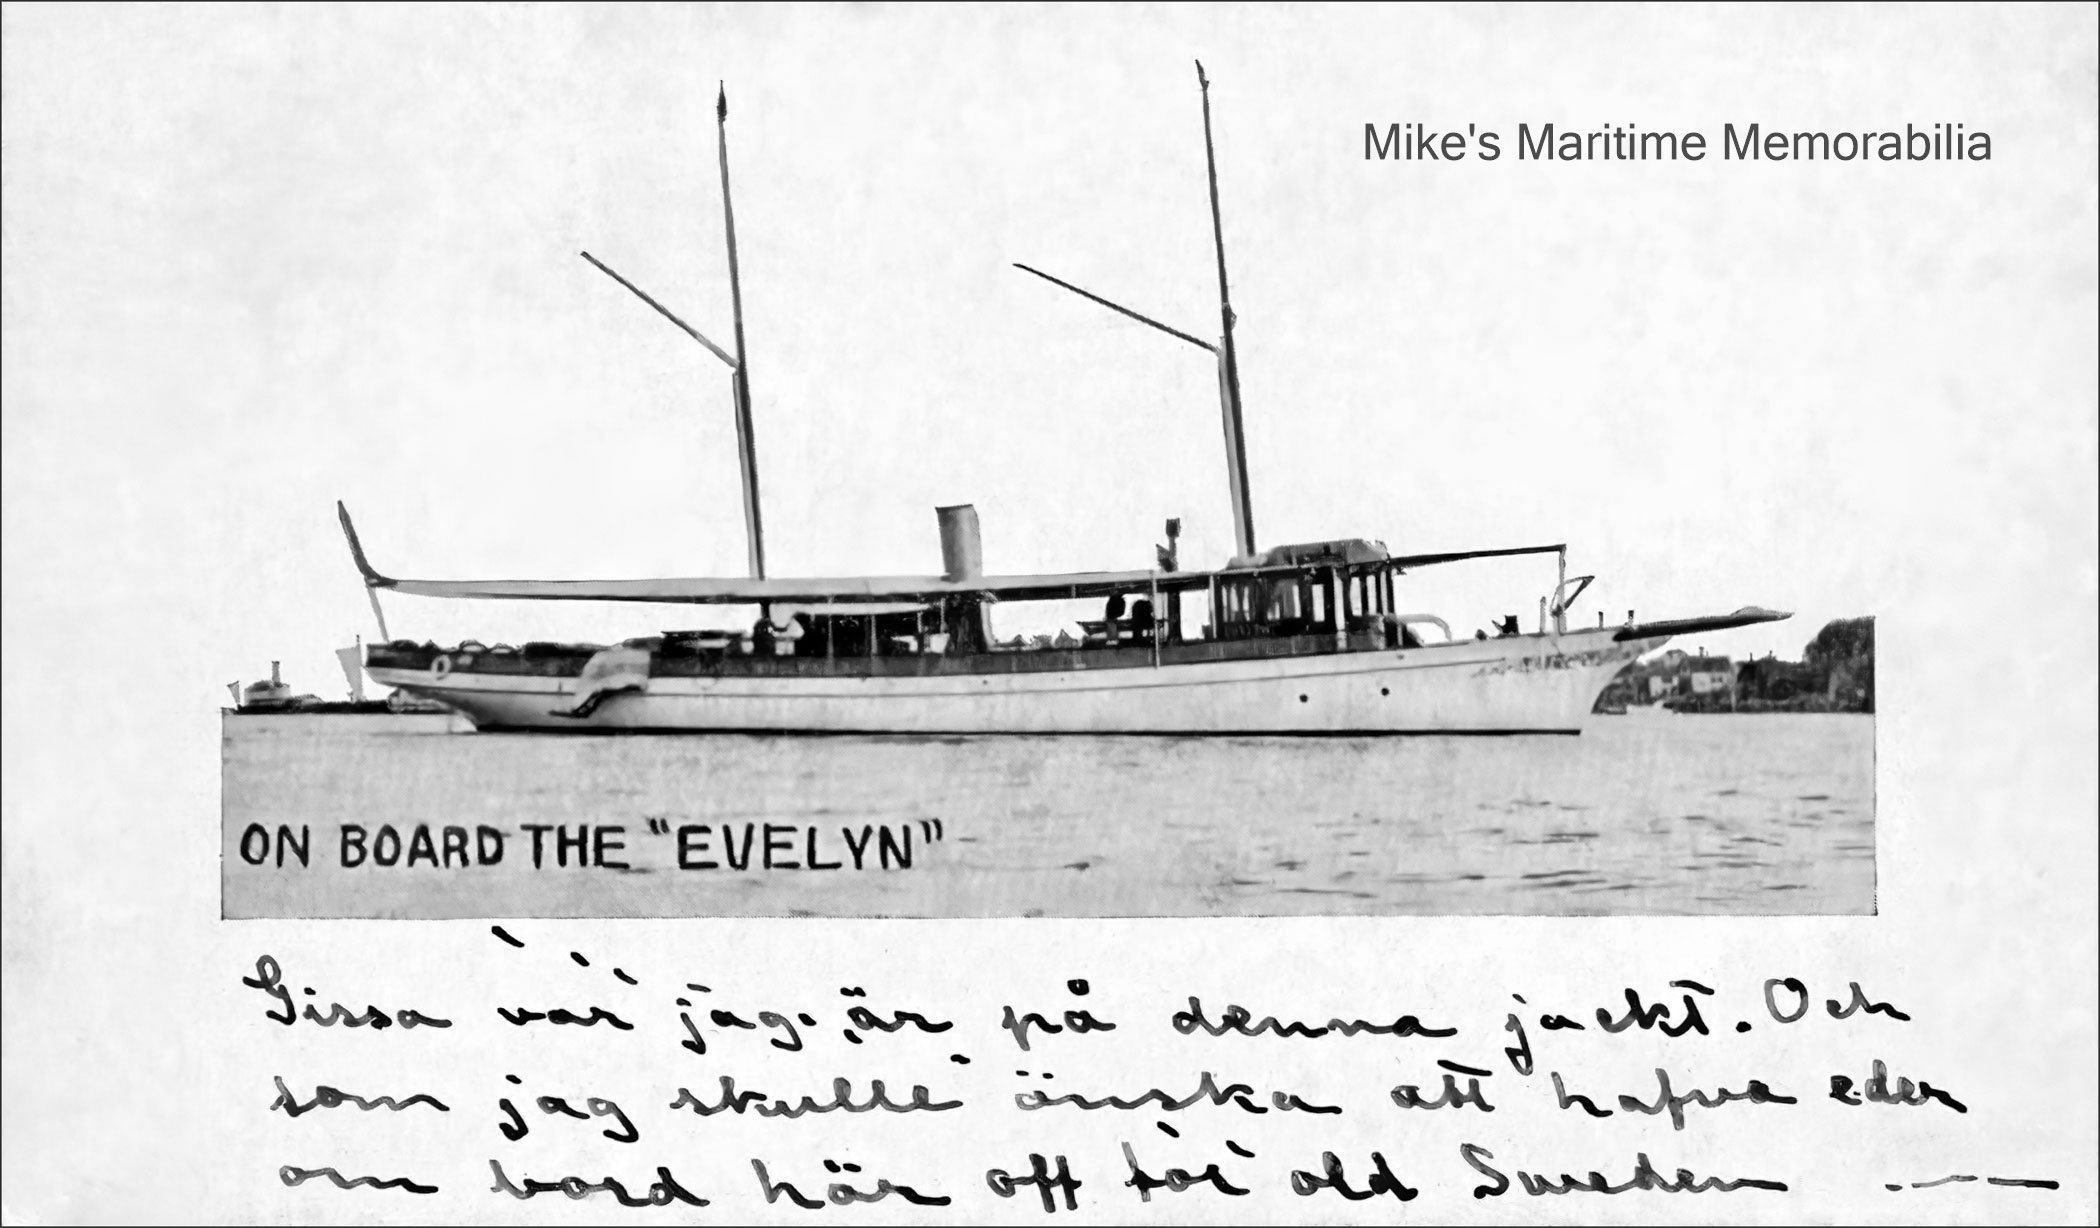 EVELYN, Brooklyn, NY – 1906 The steam yacht "EVELYN" is seen in this postcard before she was converted to a party fishing boat. Built in 1892 at Nyack, NY and originally named the "LINTA", she later became the "EVELYN" and was purchased by Captains Jacob and Dave Martin in 1911. She was the first of many converted steam yachts to operate as a party fishing boat from Sheepshead Bay, Brooklyn, NY.